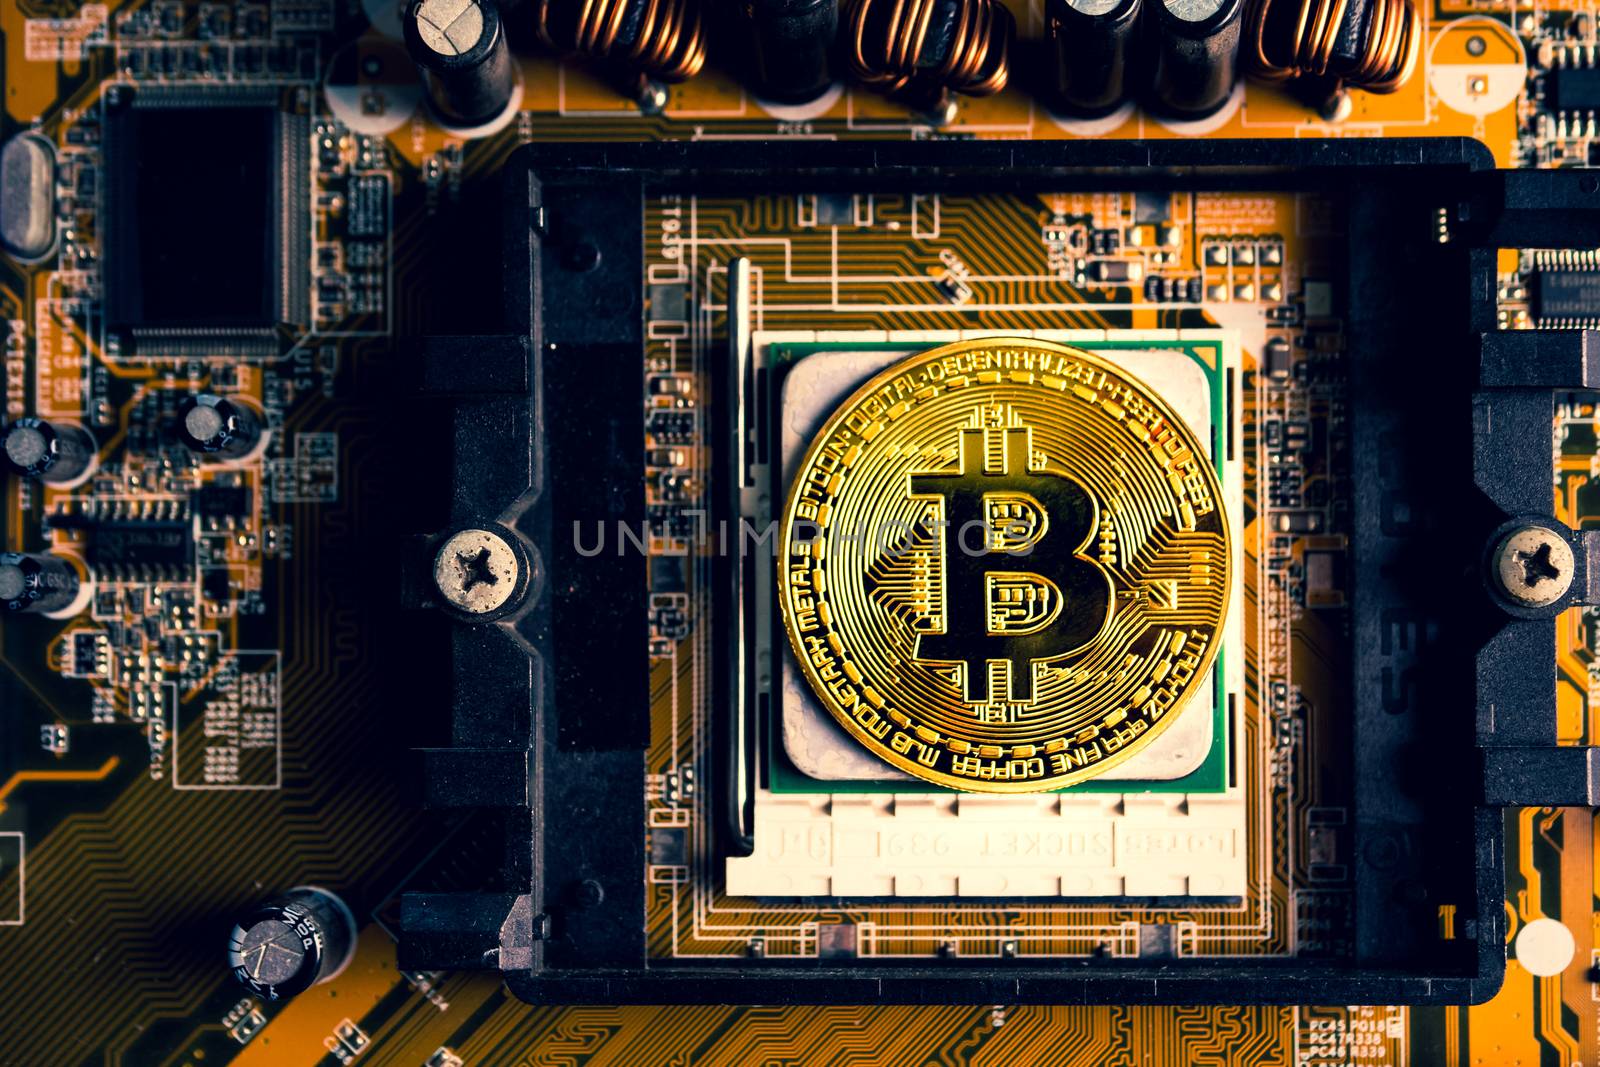 A golden coin with bitcoin symbol on a mainboard.